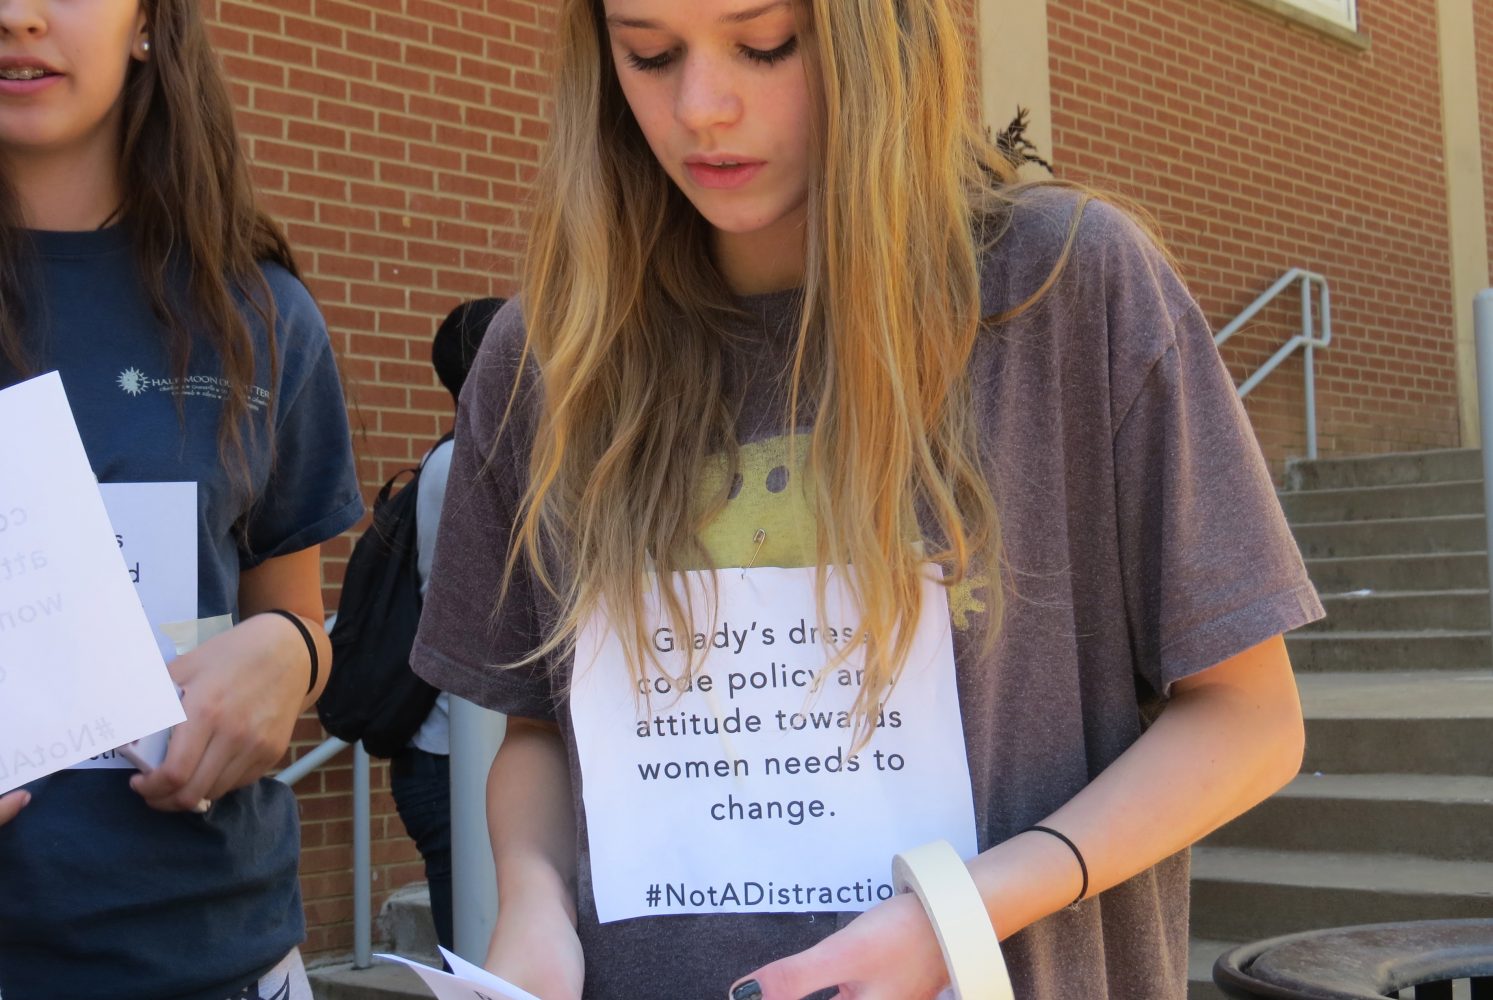 Students protest dress code policy, enforcement